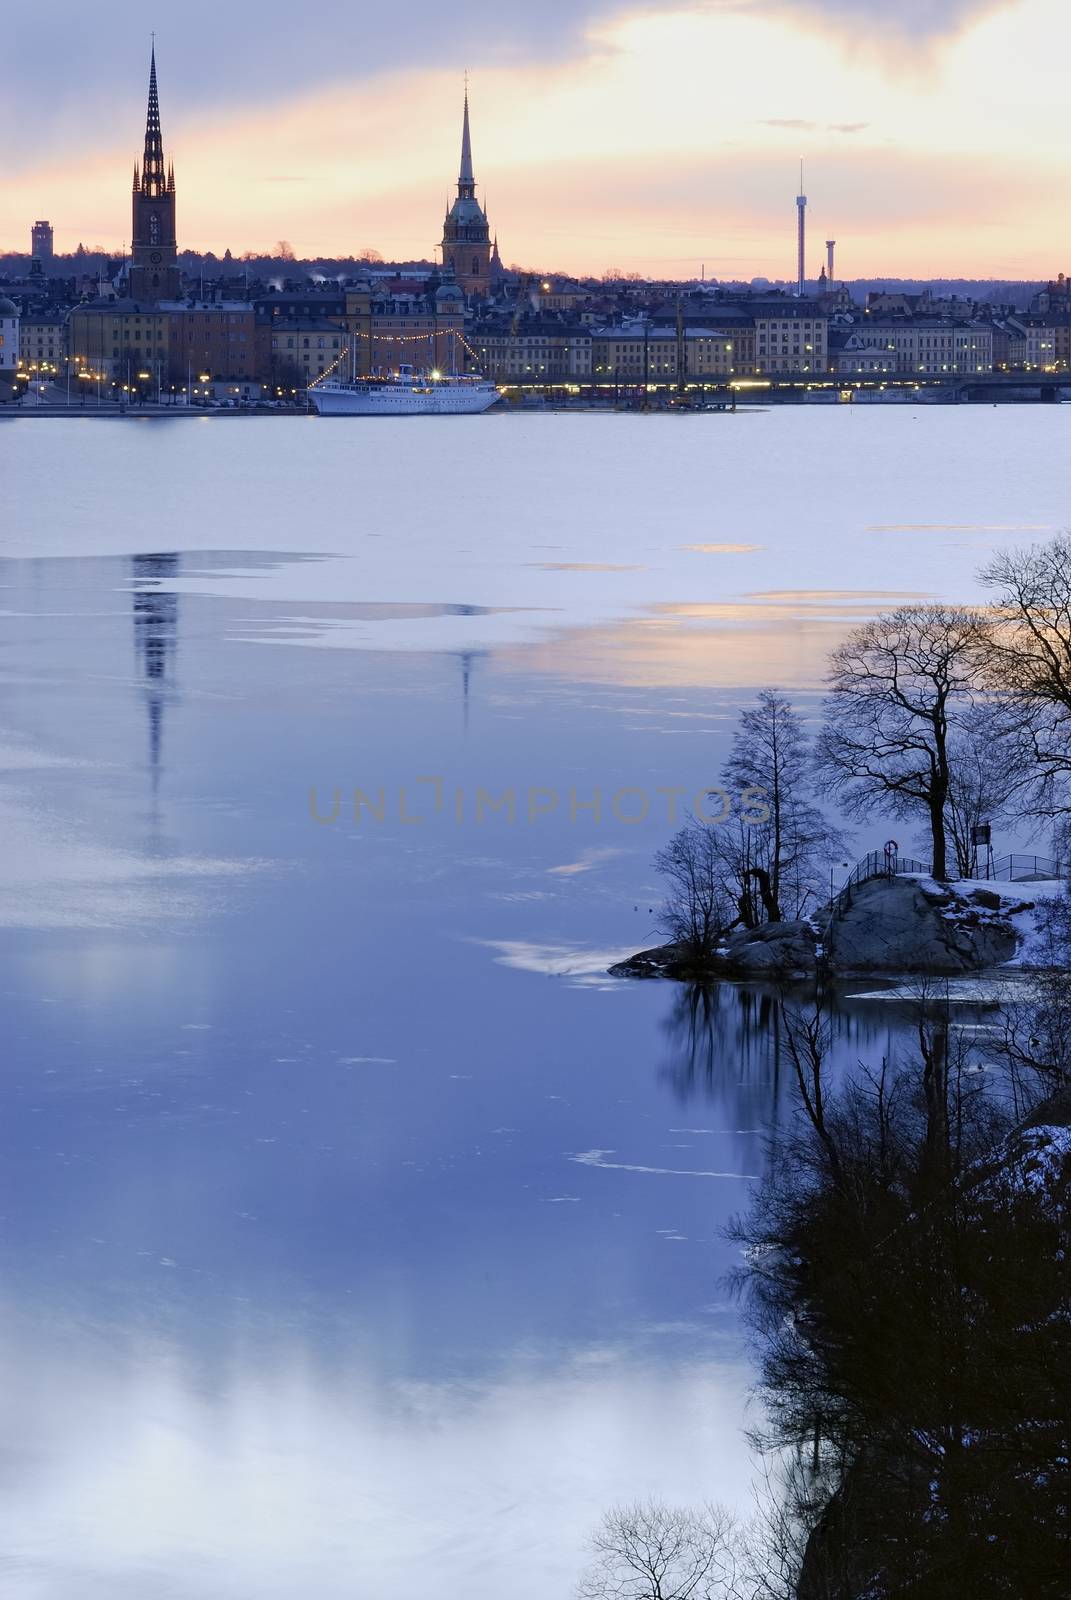 Stockholm silhouette with famous landmarks by a40757